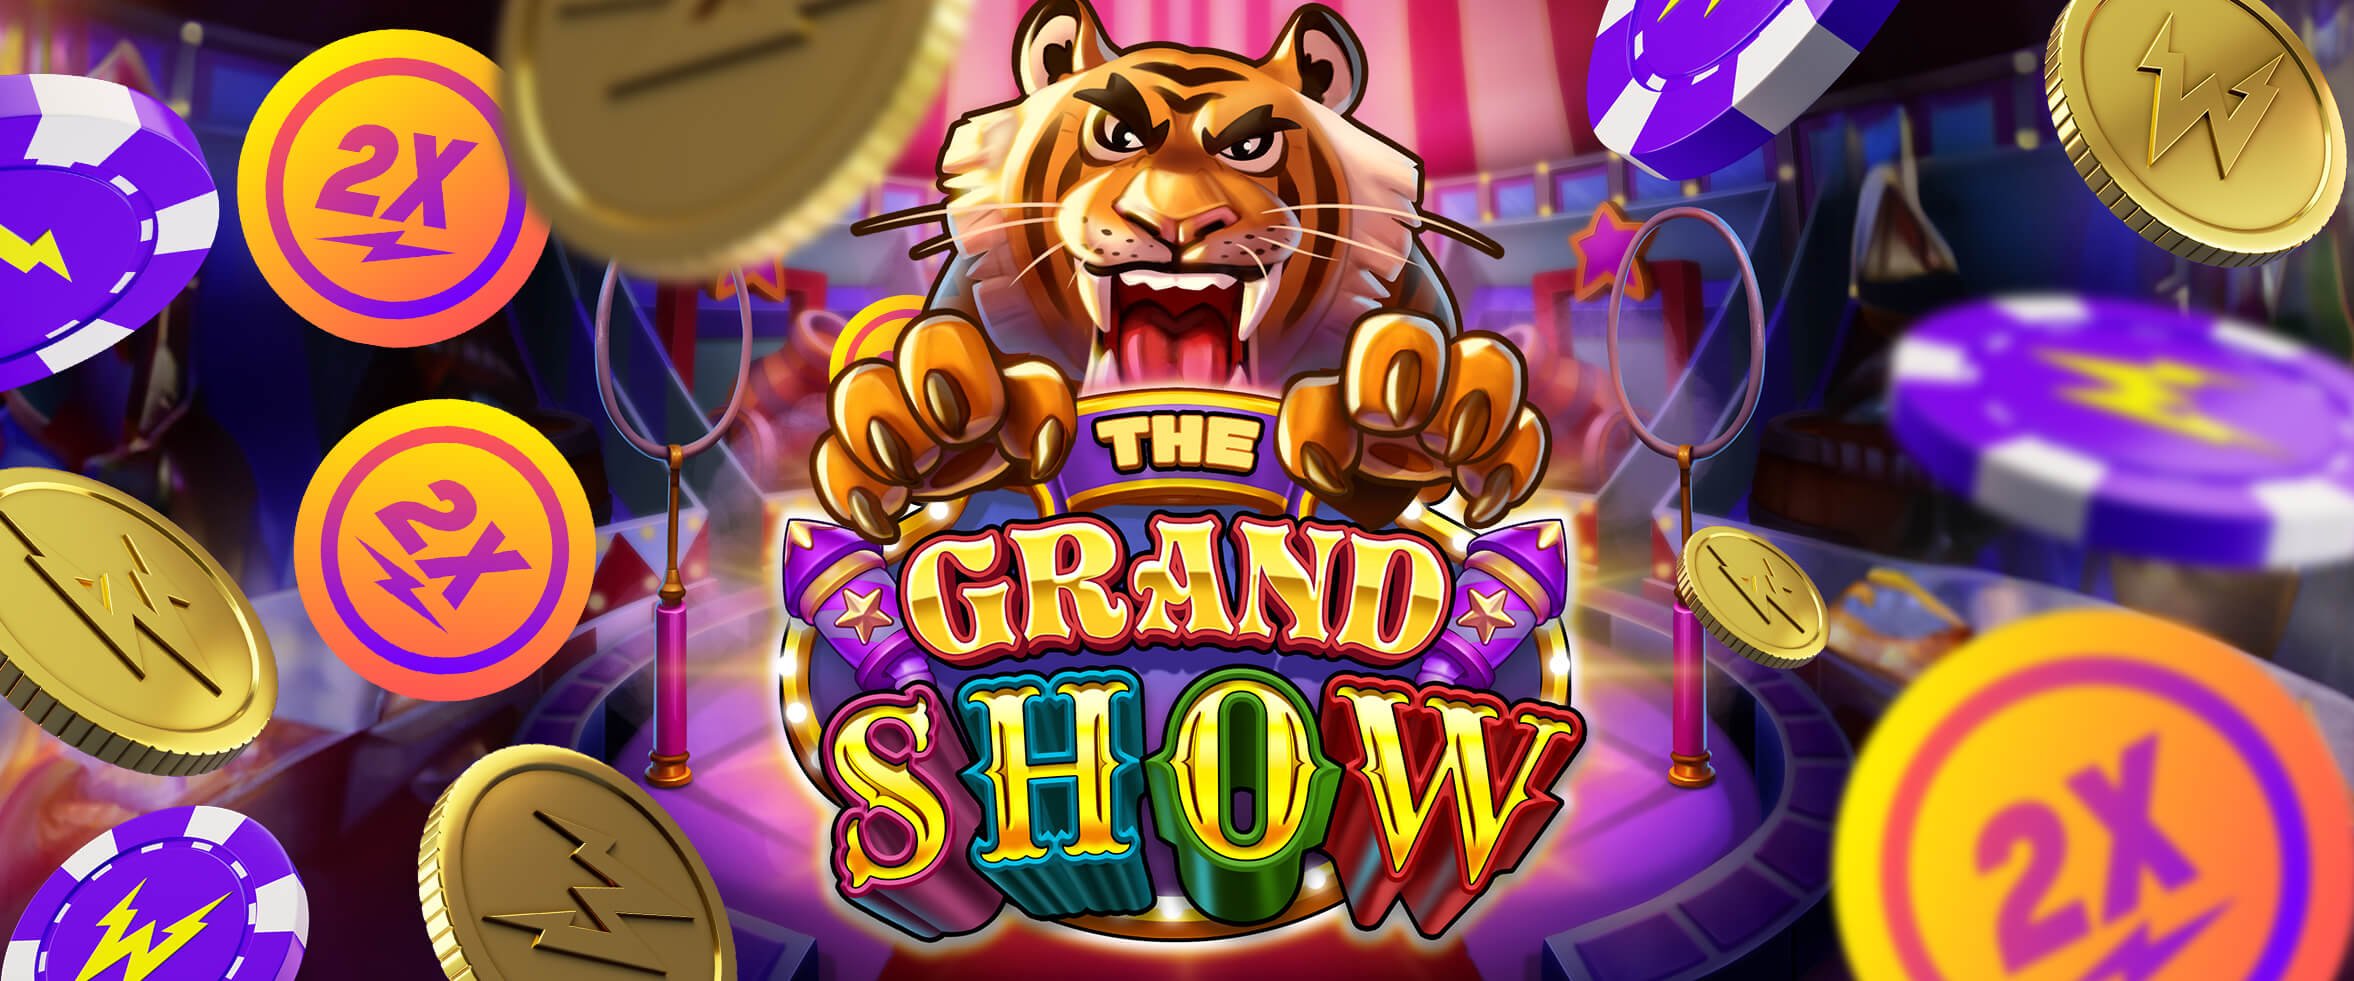 The Grand Show! New 2x Speed/Free Spins Exclusive!